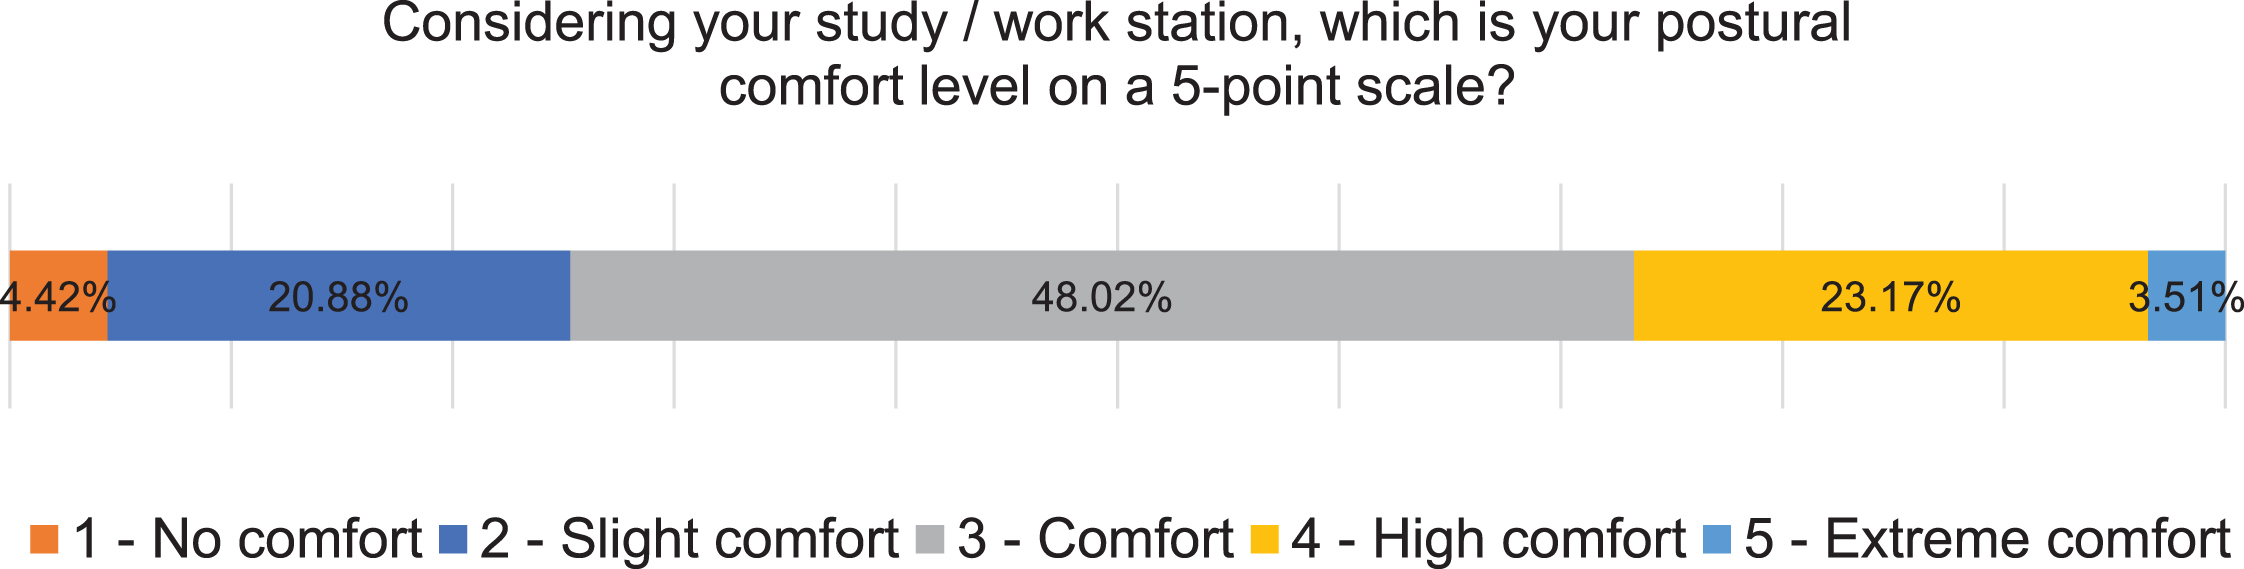 Percentages of perceived comfort level, rated on a 5-point scale.